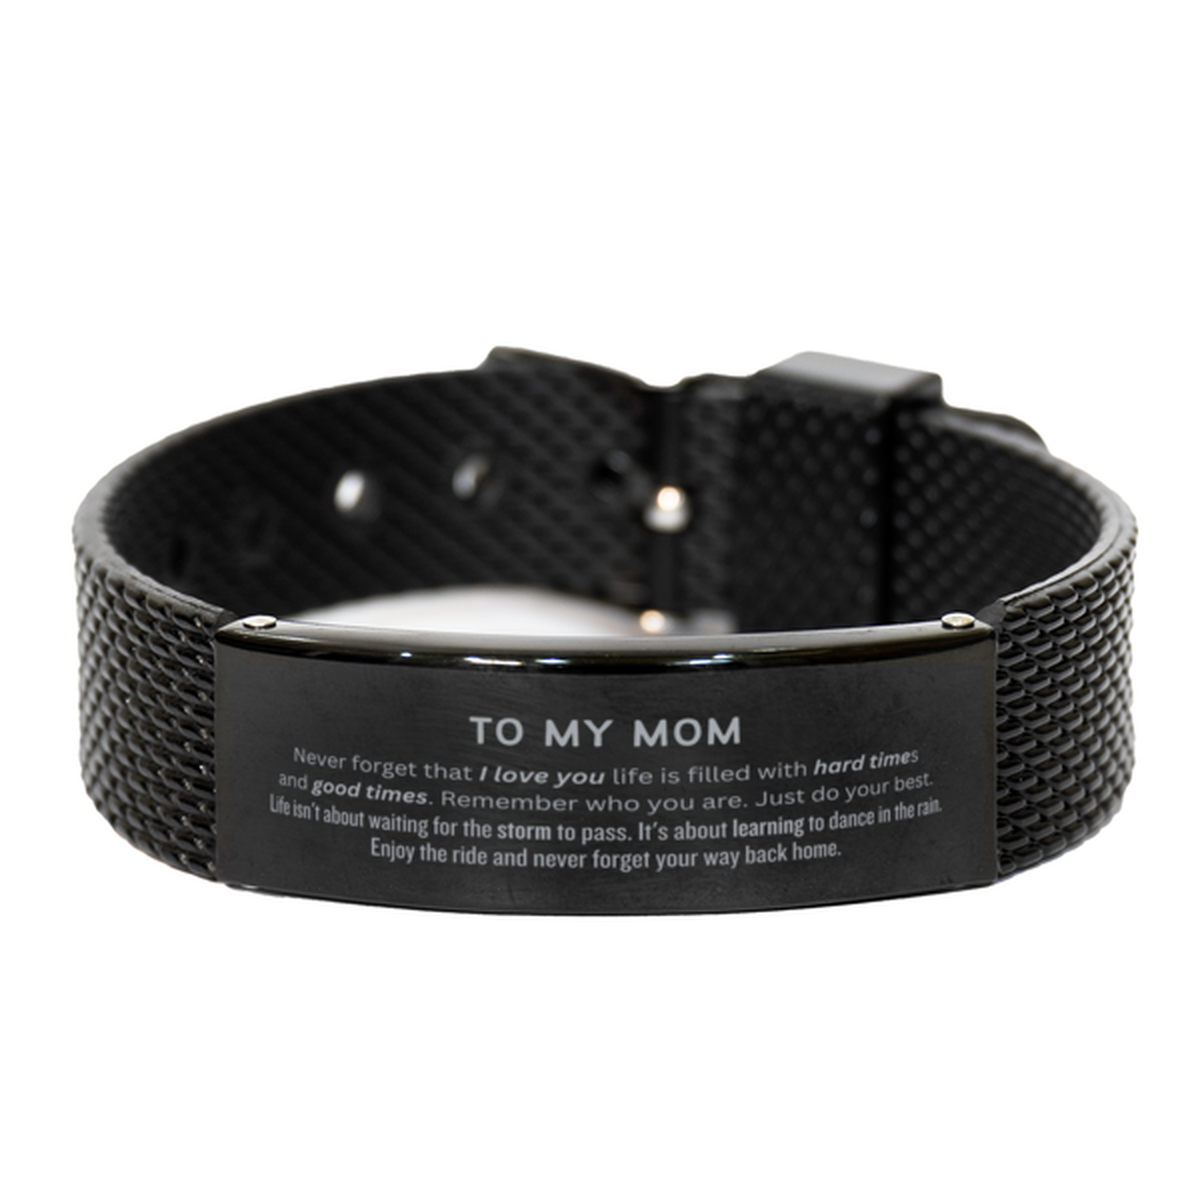 Christmas Mom Black Shark Mesh Bracelet Gifts, To My Mom Birthday Thank You Gifts For Mom, Graduation Unique Gifts For Mom To My Mom Never forget that I love you life is filled with hard times and good times. Remember who you are. Just do your best